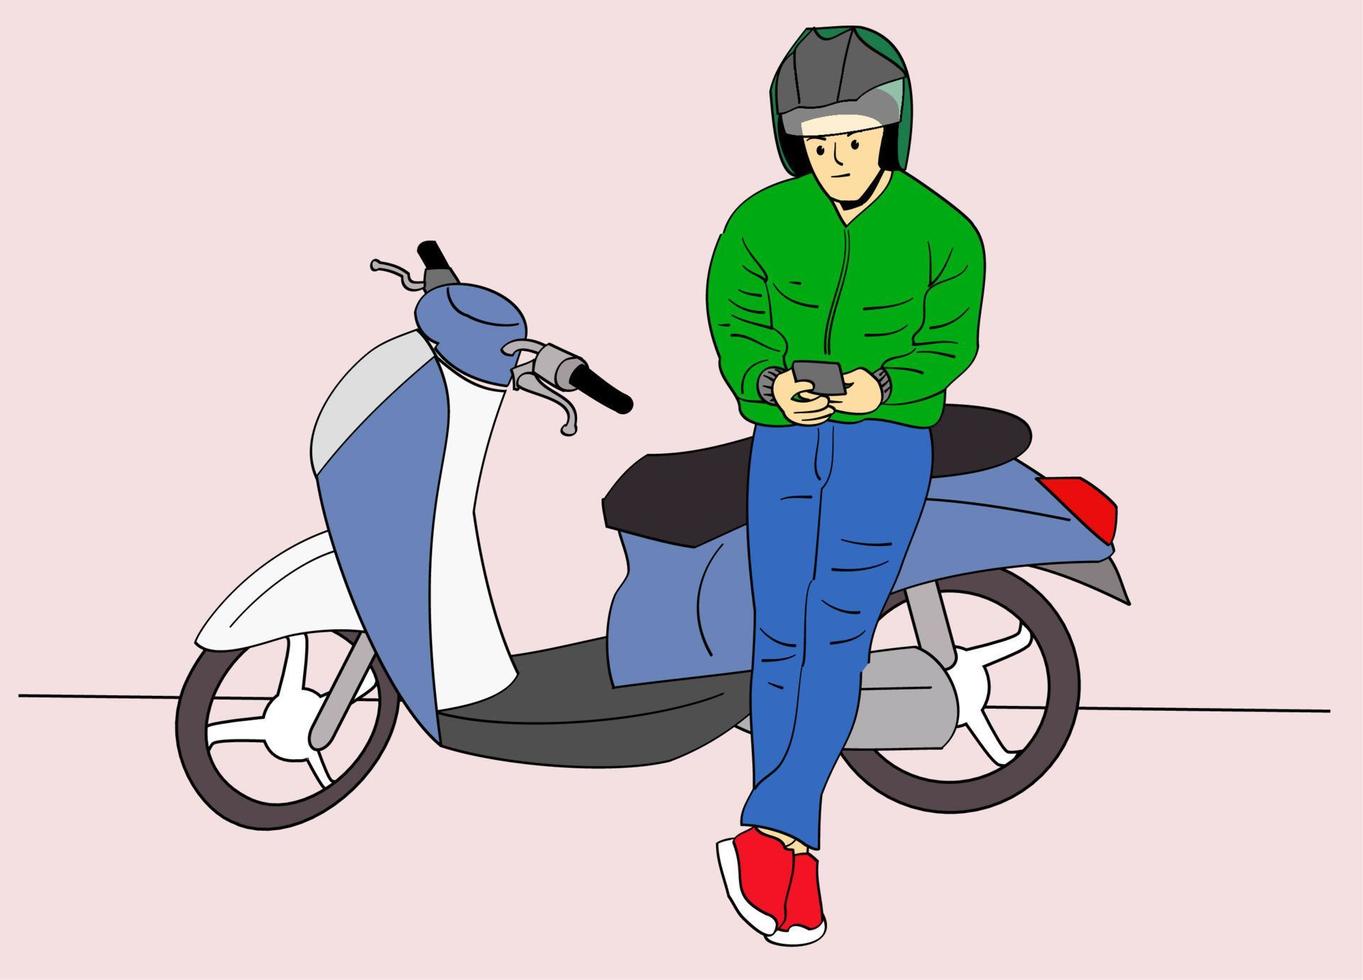 Online transport driver is waiting for passengers. Hand drawn style vector design illustrations.